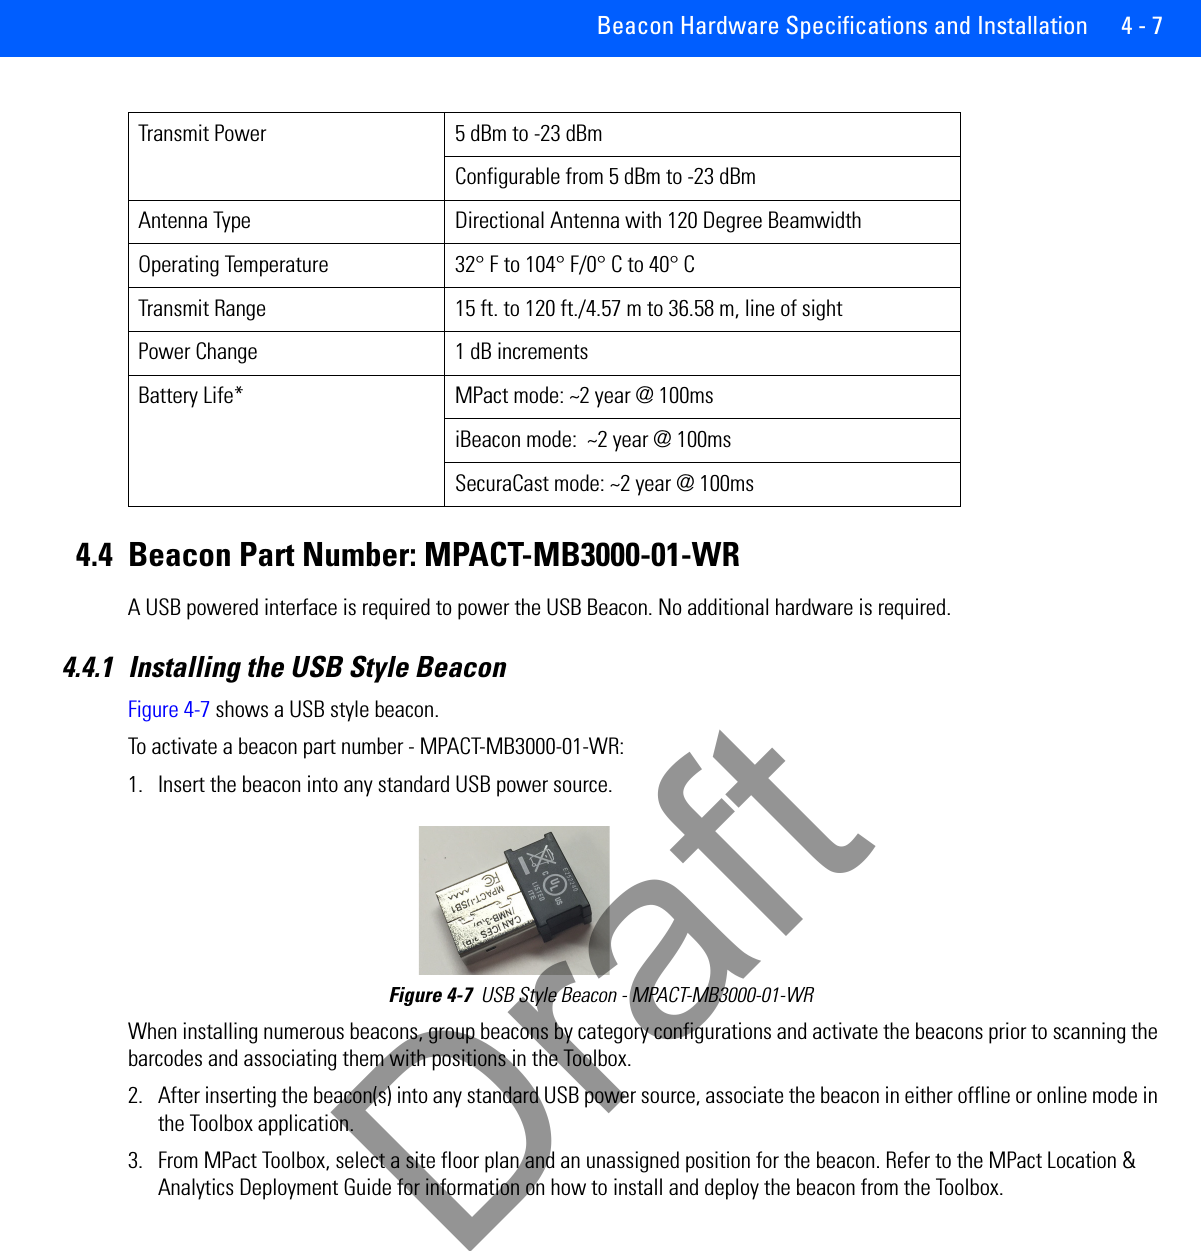 Beacon Hardware Specifications and Installation 4 - 74.4 Beacon Part Number: MPACT-MB3000-01-WRA USB powered interface is required to power the USB Beacon. No additional hardware is required.4.4.1 Installing the USB Style BeaconFigure 4-7 shows a USB style beacon. To activate a beacon part number - MPACT-MB3000-01-WR: 1. Insert the beacon into any standard USB power source.Figure 4-7  USB Style Beacon - MPACT-MB3000-01-WR When installing numerous beacons, group beacons by category configurations and activate the beacons prior to scanning the barcodes and associating them with positions in the Toolbox.2. After inserting the beacon(s) into any standard USB power source, associate the beacon in either offline or online mode in the Toolbox application.    3. From MPact Toolbox, select a site floor plan and an unassigned position for the beacon. Refer to the MPact Location &amp; Analytics Deployment Guide for information on how to install and deploy the beacon from the Toolbox. Transmit Power 5 dBm to -23 dBmConfigurable from 5 dBm to -23 dBmAntenna Type Directional Antenna with 120 Degree BeamwidthOperating Temperature 32° F to 104° F/0° C to 40° CTransmit Range 15 ft. to 120 ft./4.57 m to 36.58 m, line of sightPower Change 1 dB incrementsBattery Life* MPact mode: ~2 year @ 100msiBeacon mode:  ~2 year @ 100msSecuraCast mode: ~2 year @ 100msDraft